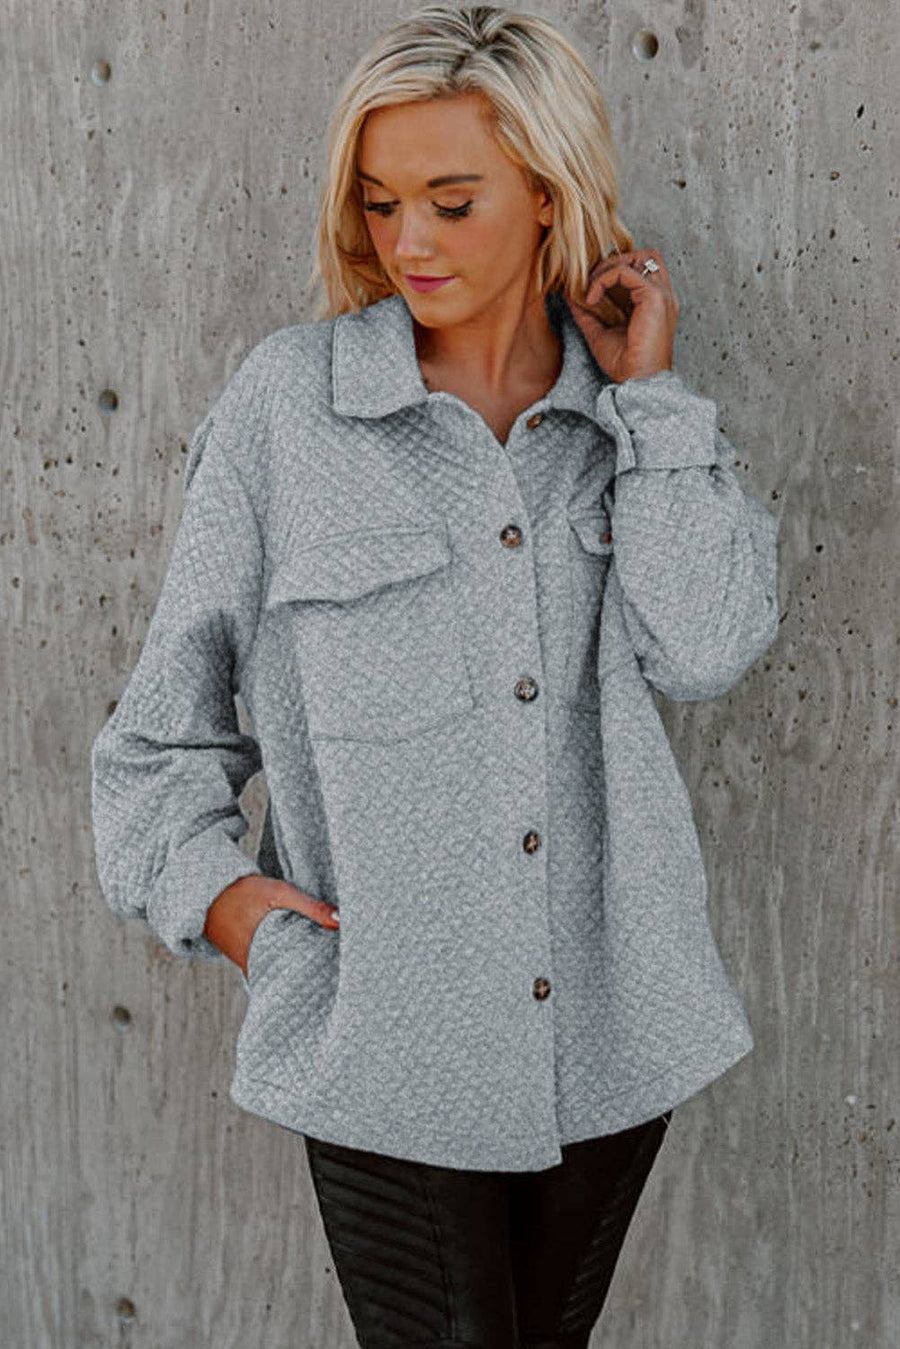 Brooklynn Retro Quilted Flap Pocket Button Shacket: S / 95%Polyester+5%Elastane / Gray